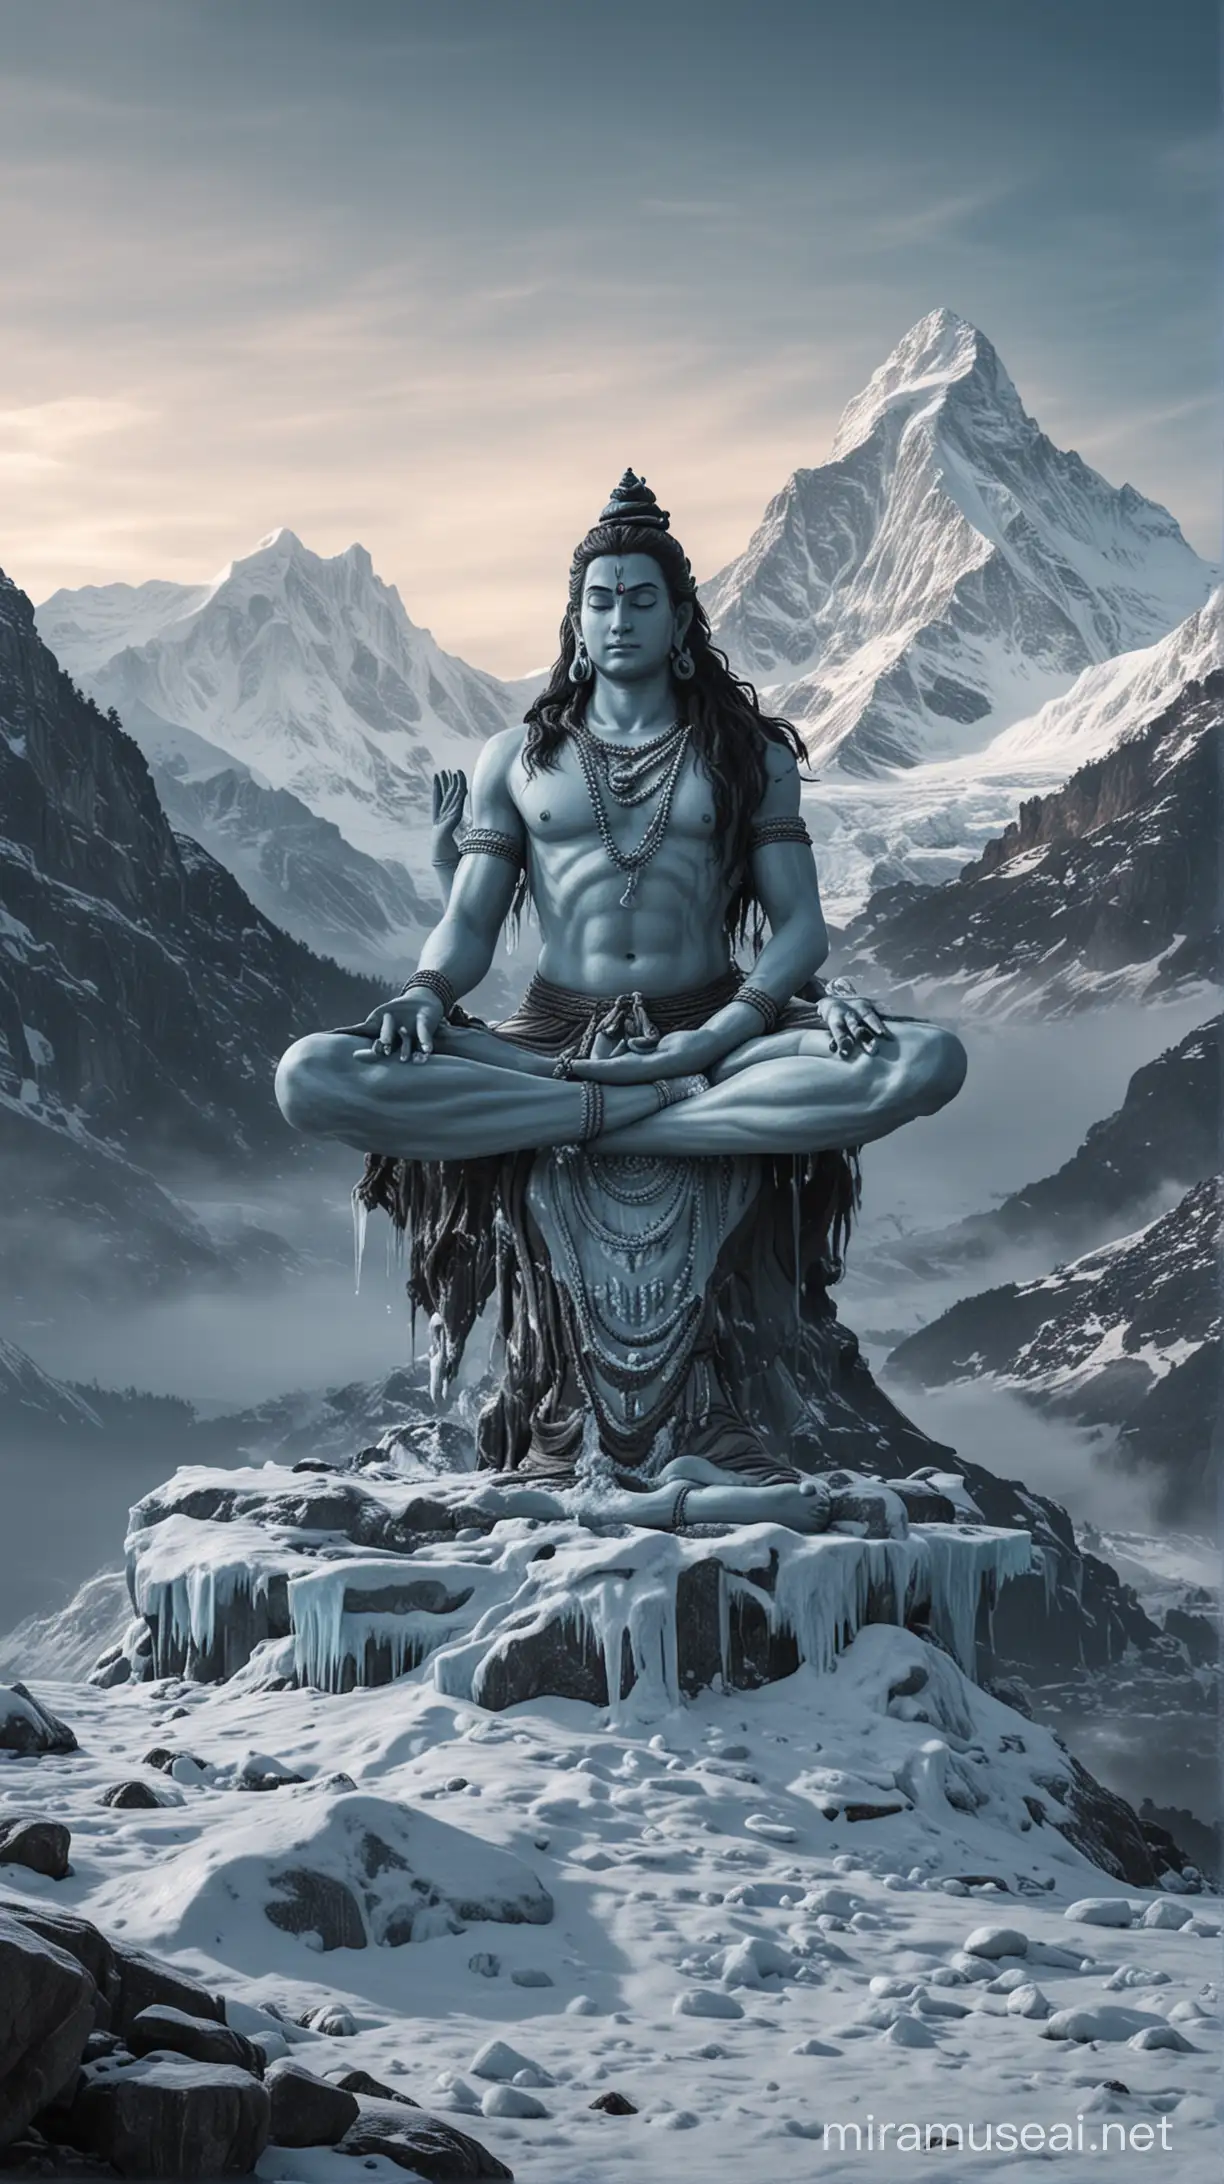 Lord Shiva meditating on a icy mountain long shot
